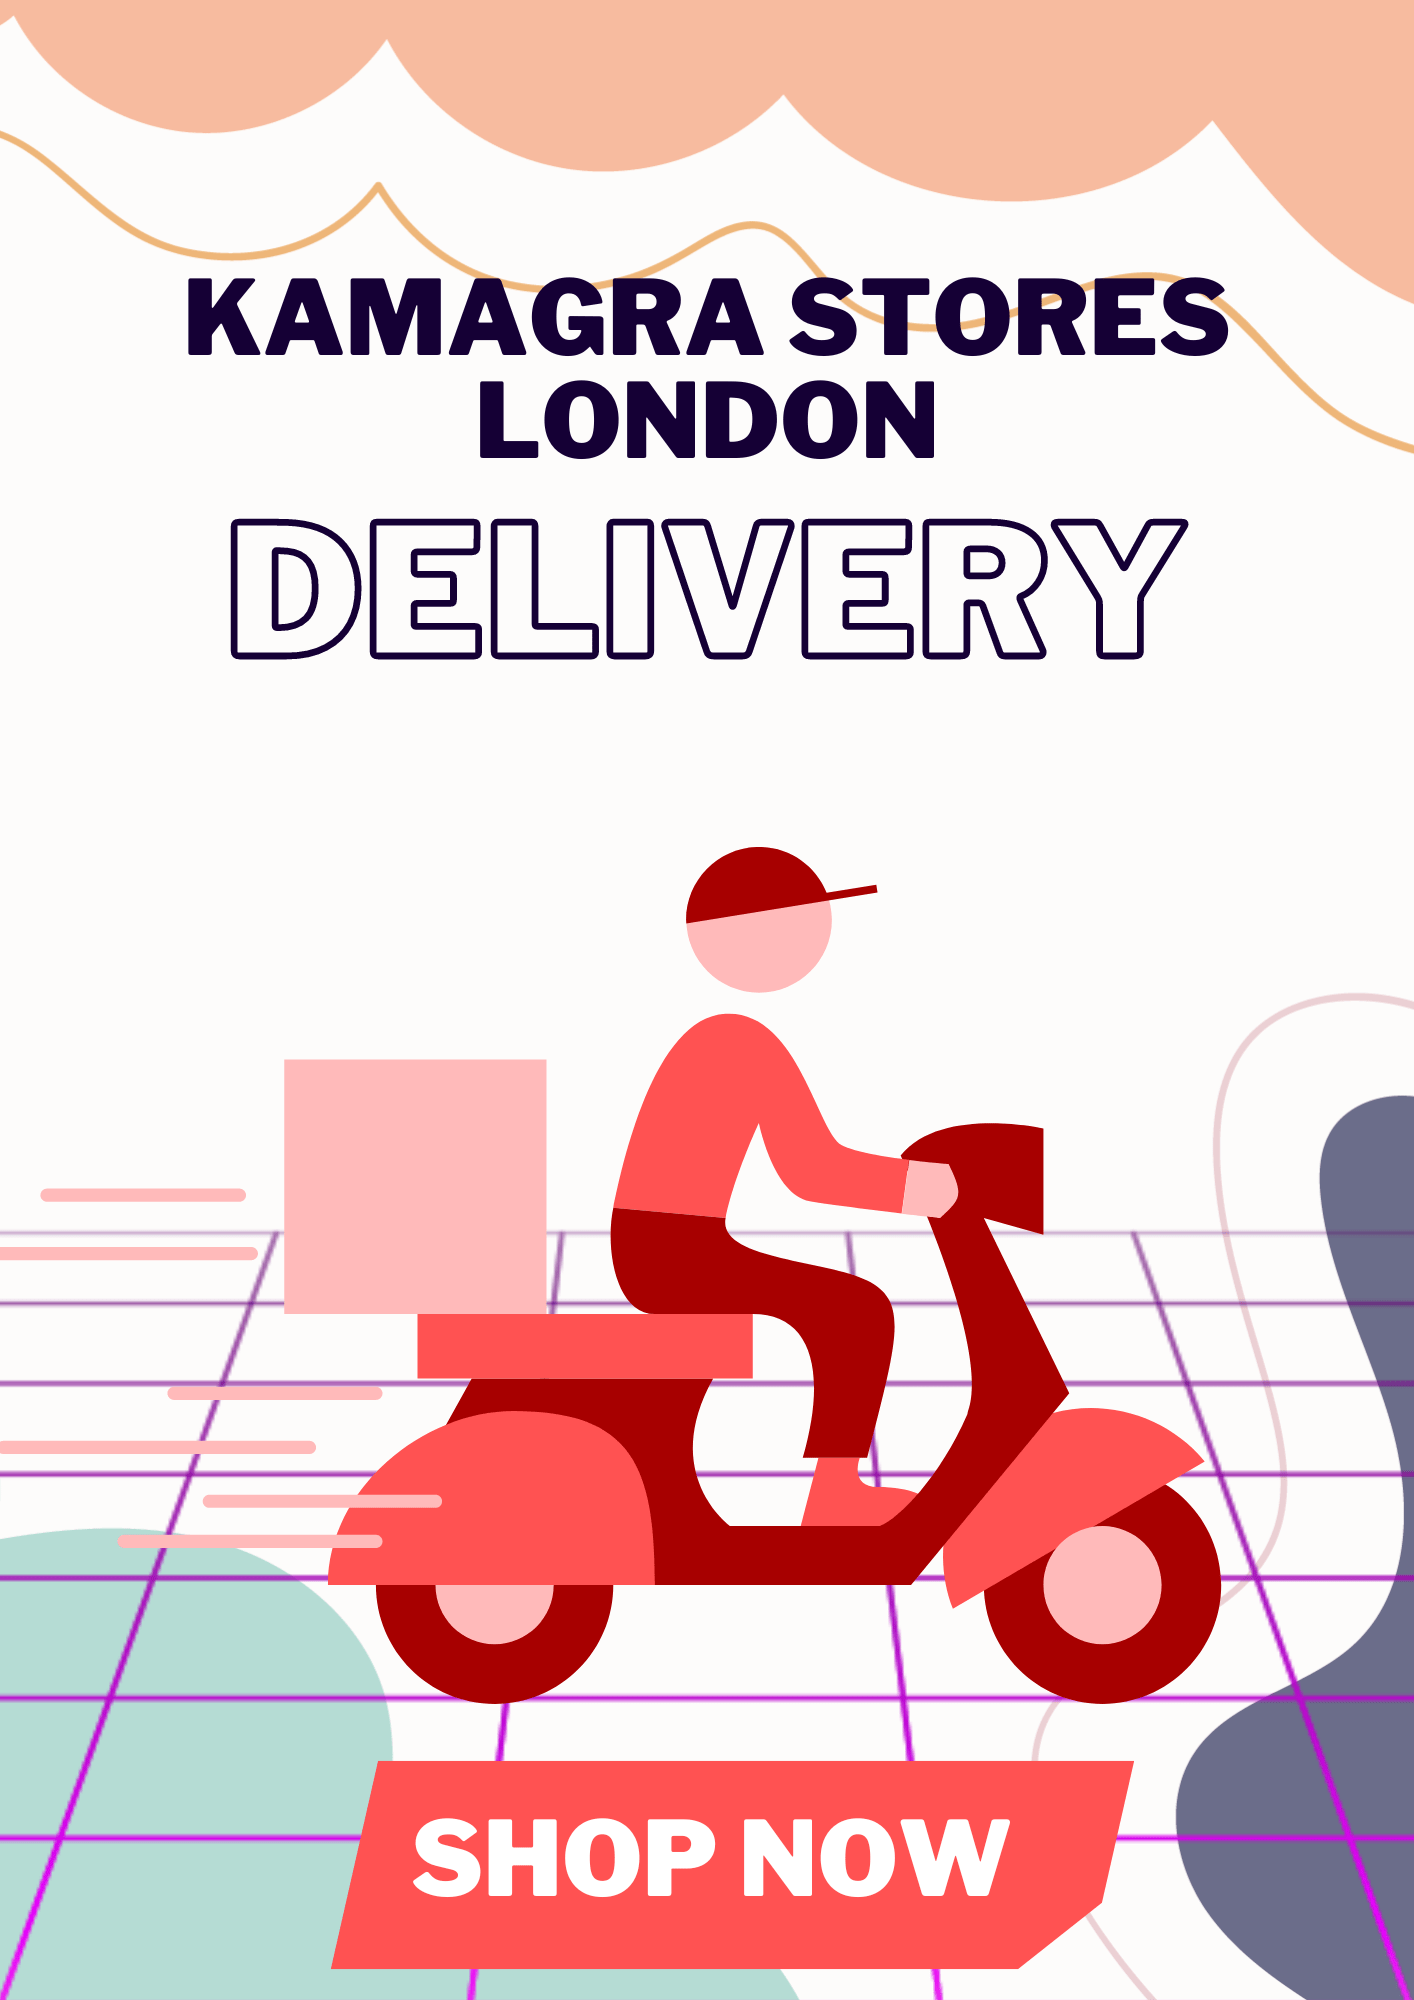 Kamagra stores London delivery